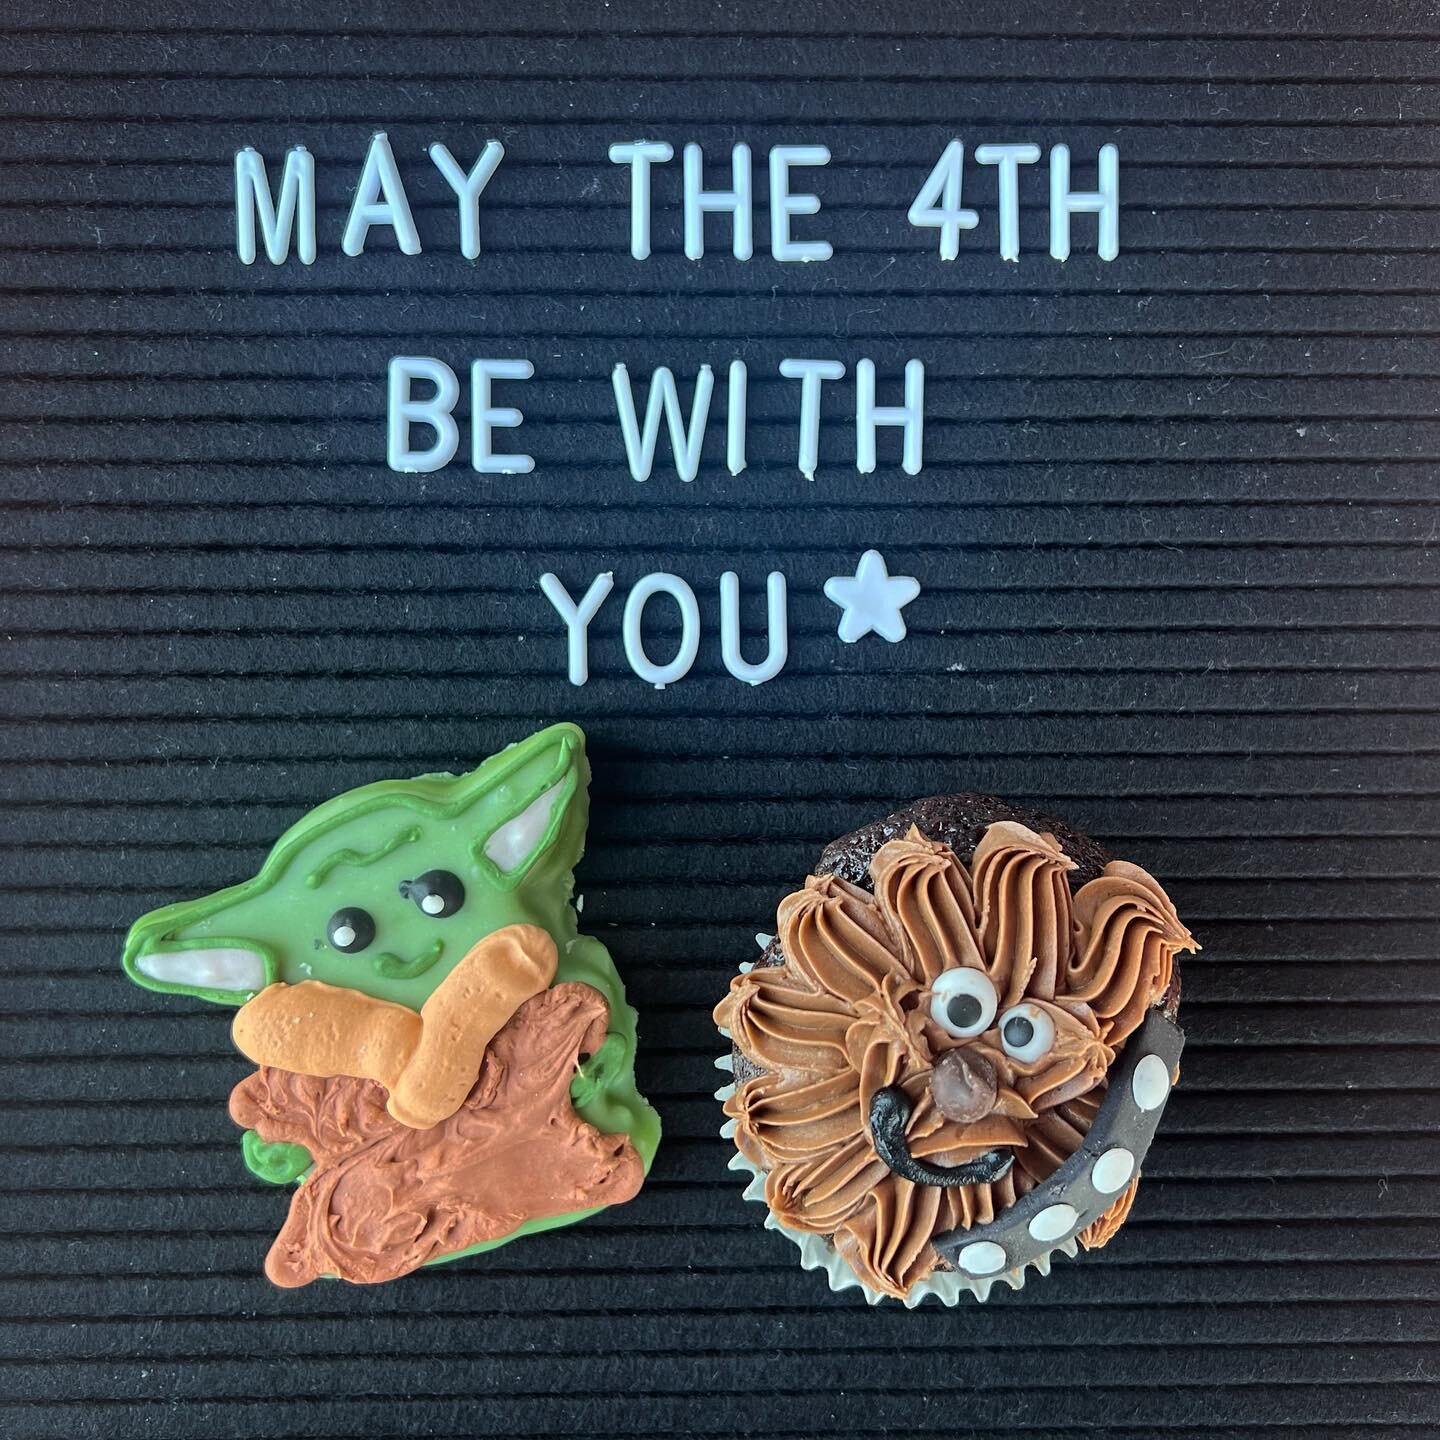 May the Fourth Be With You.

We have a limited supply of Yoda &amp; Chewbacca all day!

Come see us tonight for Fondren Live!

#maythe4thbewithyou #starwars #fondrenlive #mycityjxnms